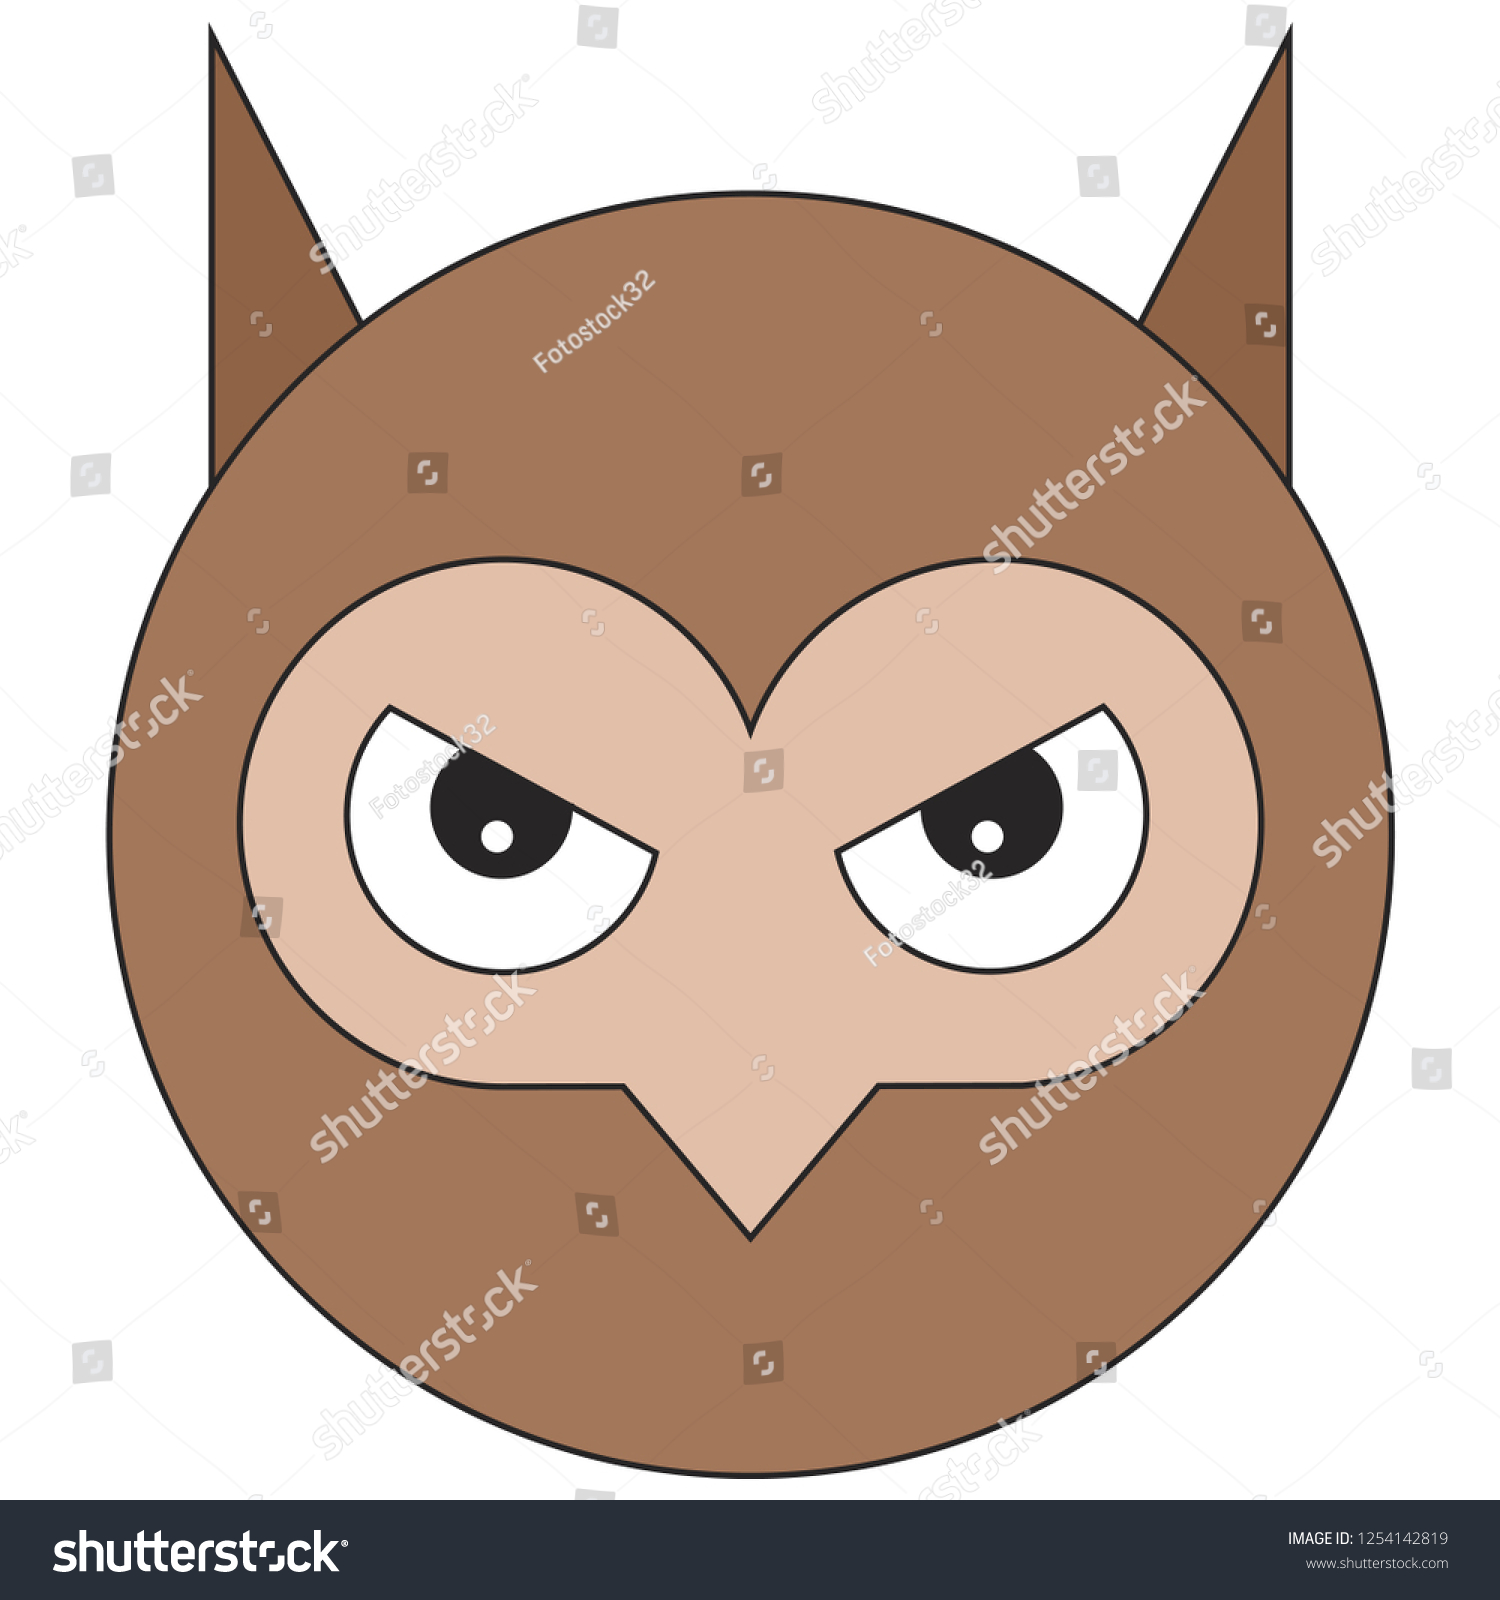 SVG of Head of owl in cartoon flat style. Vector illustration on white background. svg